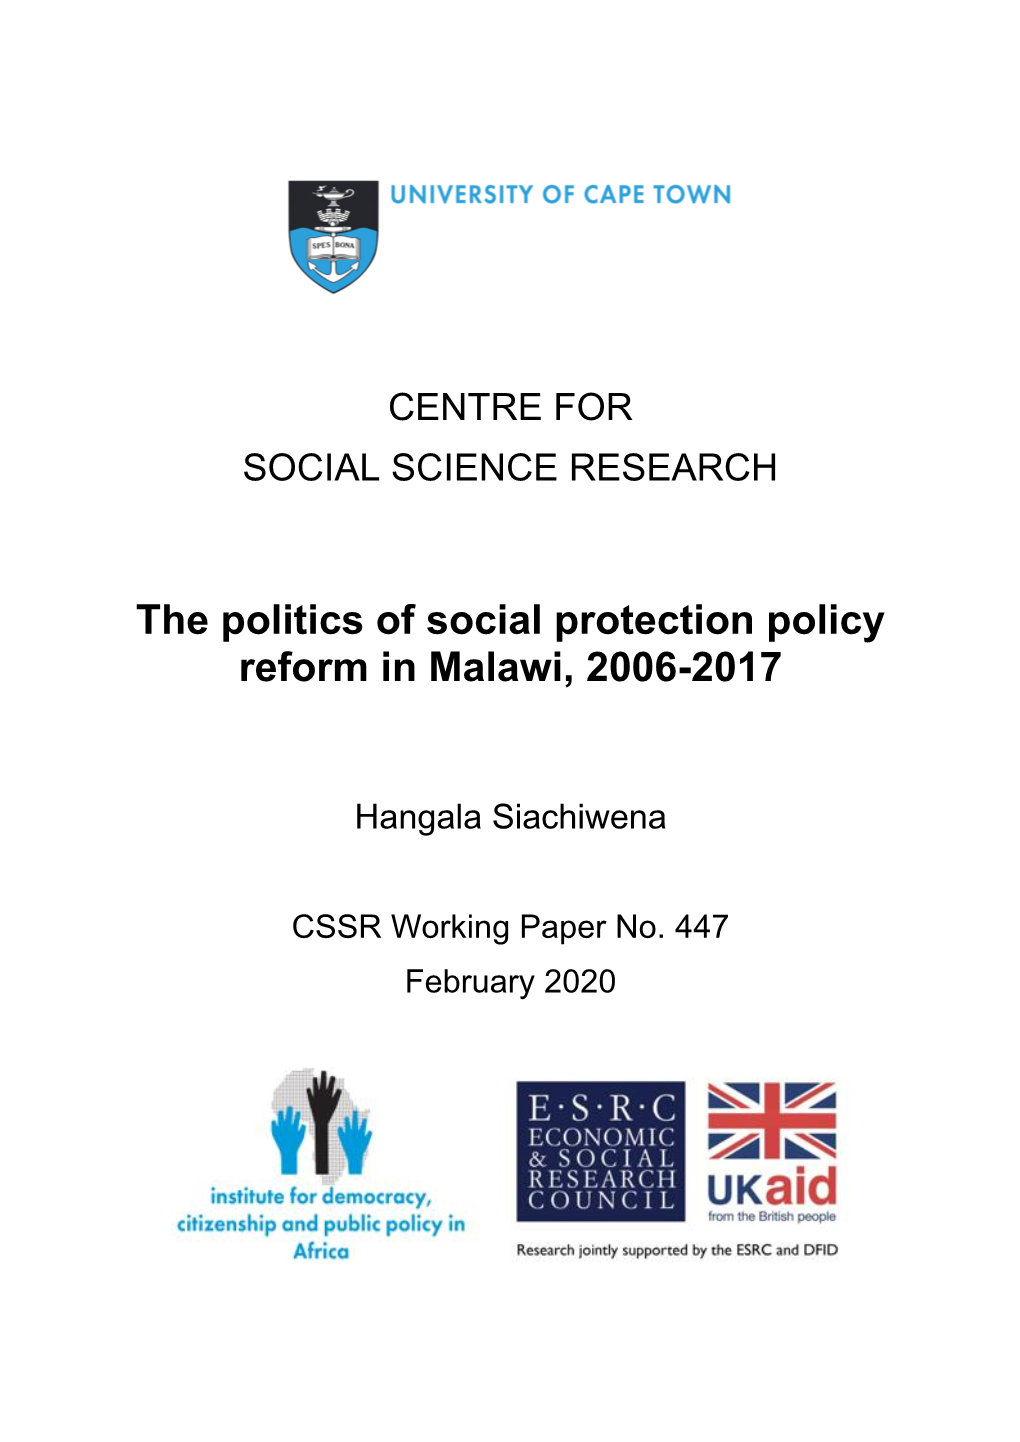 The Politics of Social Protection Policy Reform in Malawi, 2006-2017